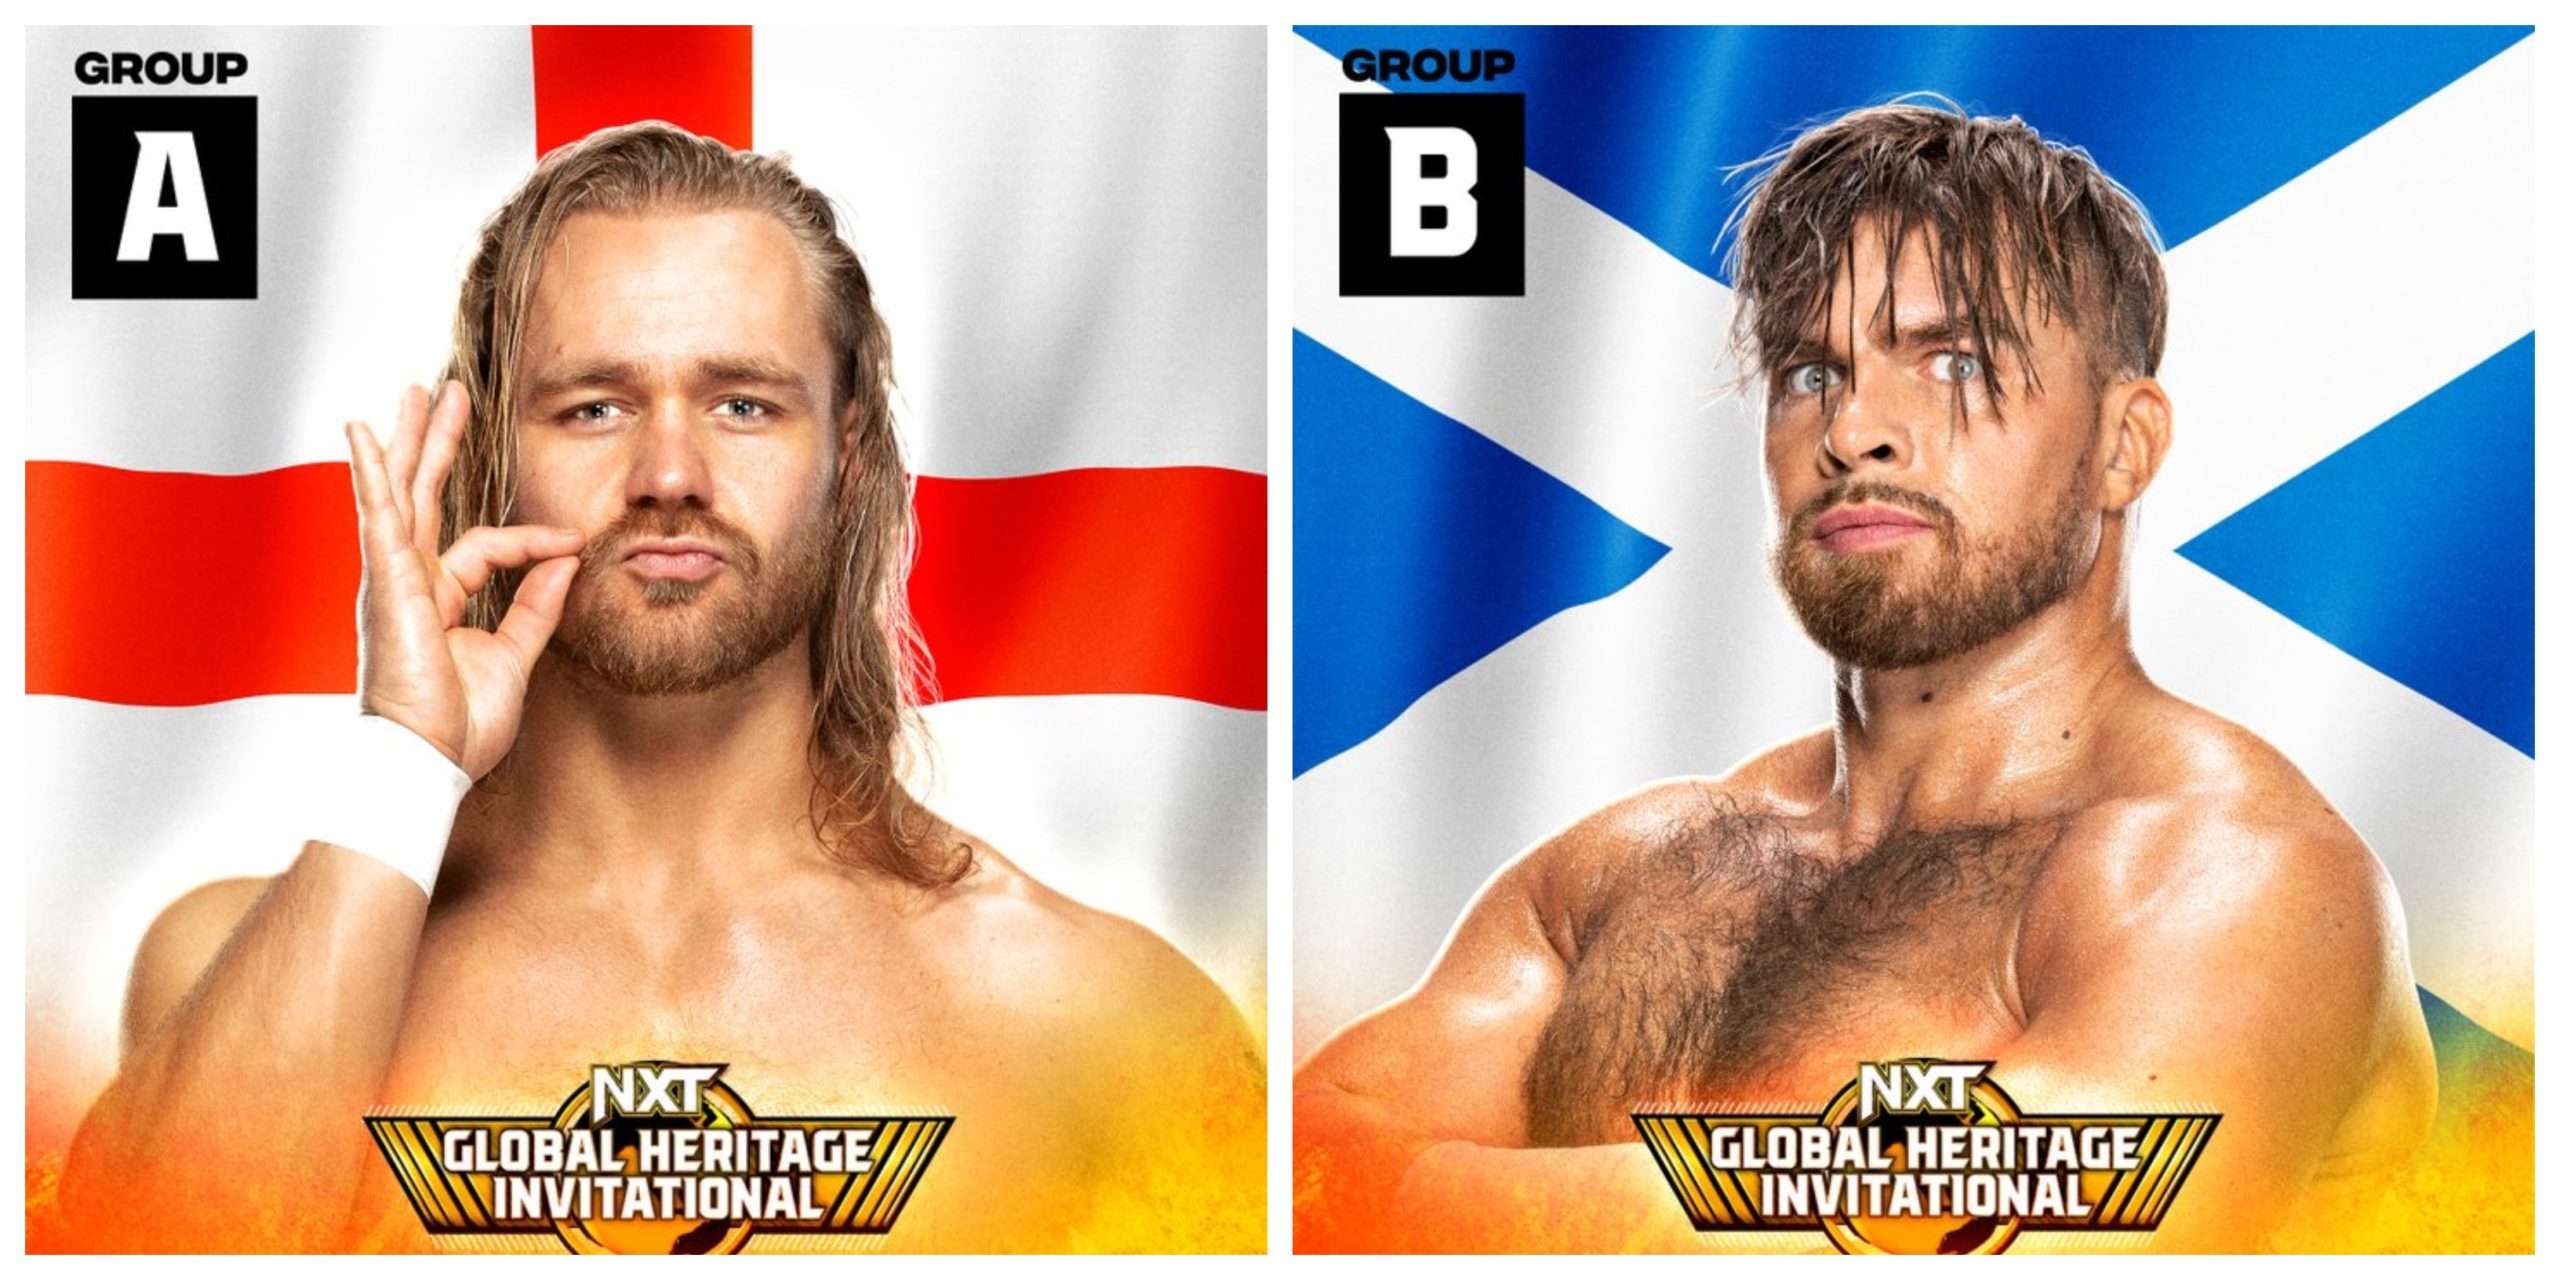 Tyler Bate and Joe Coffey first two competitors announced for NXT